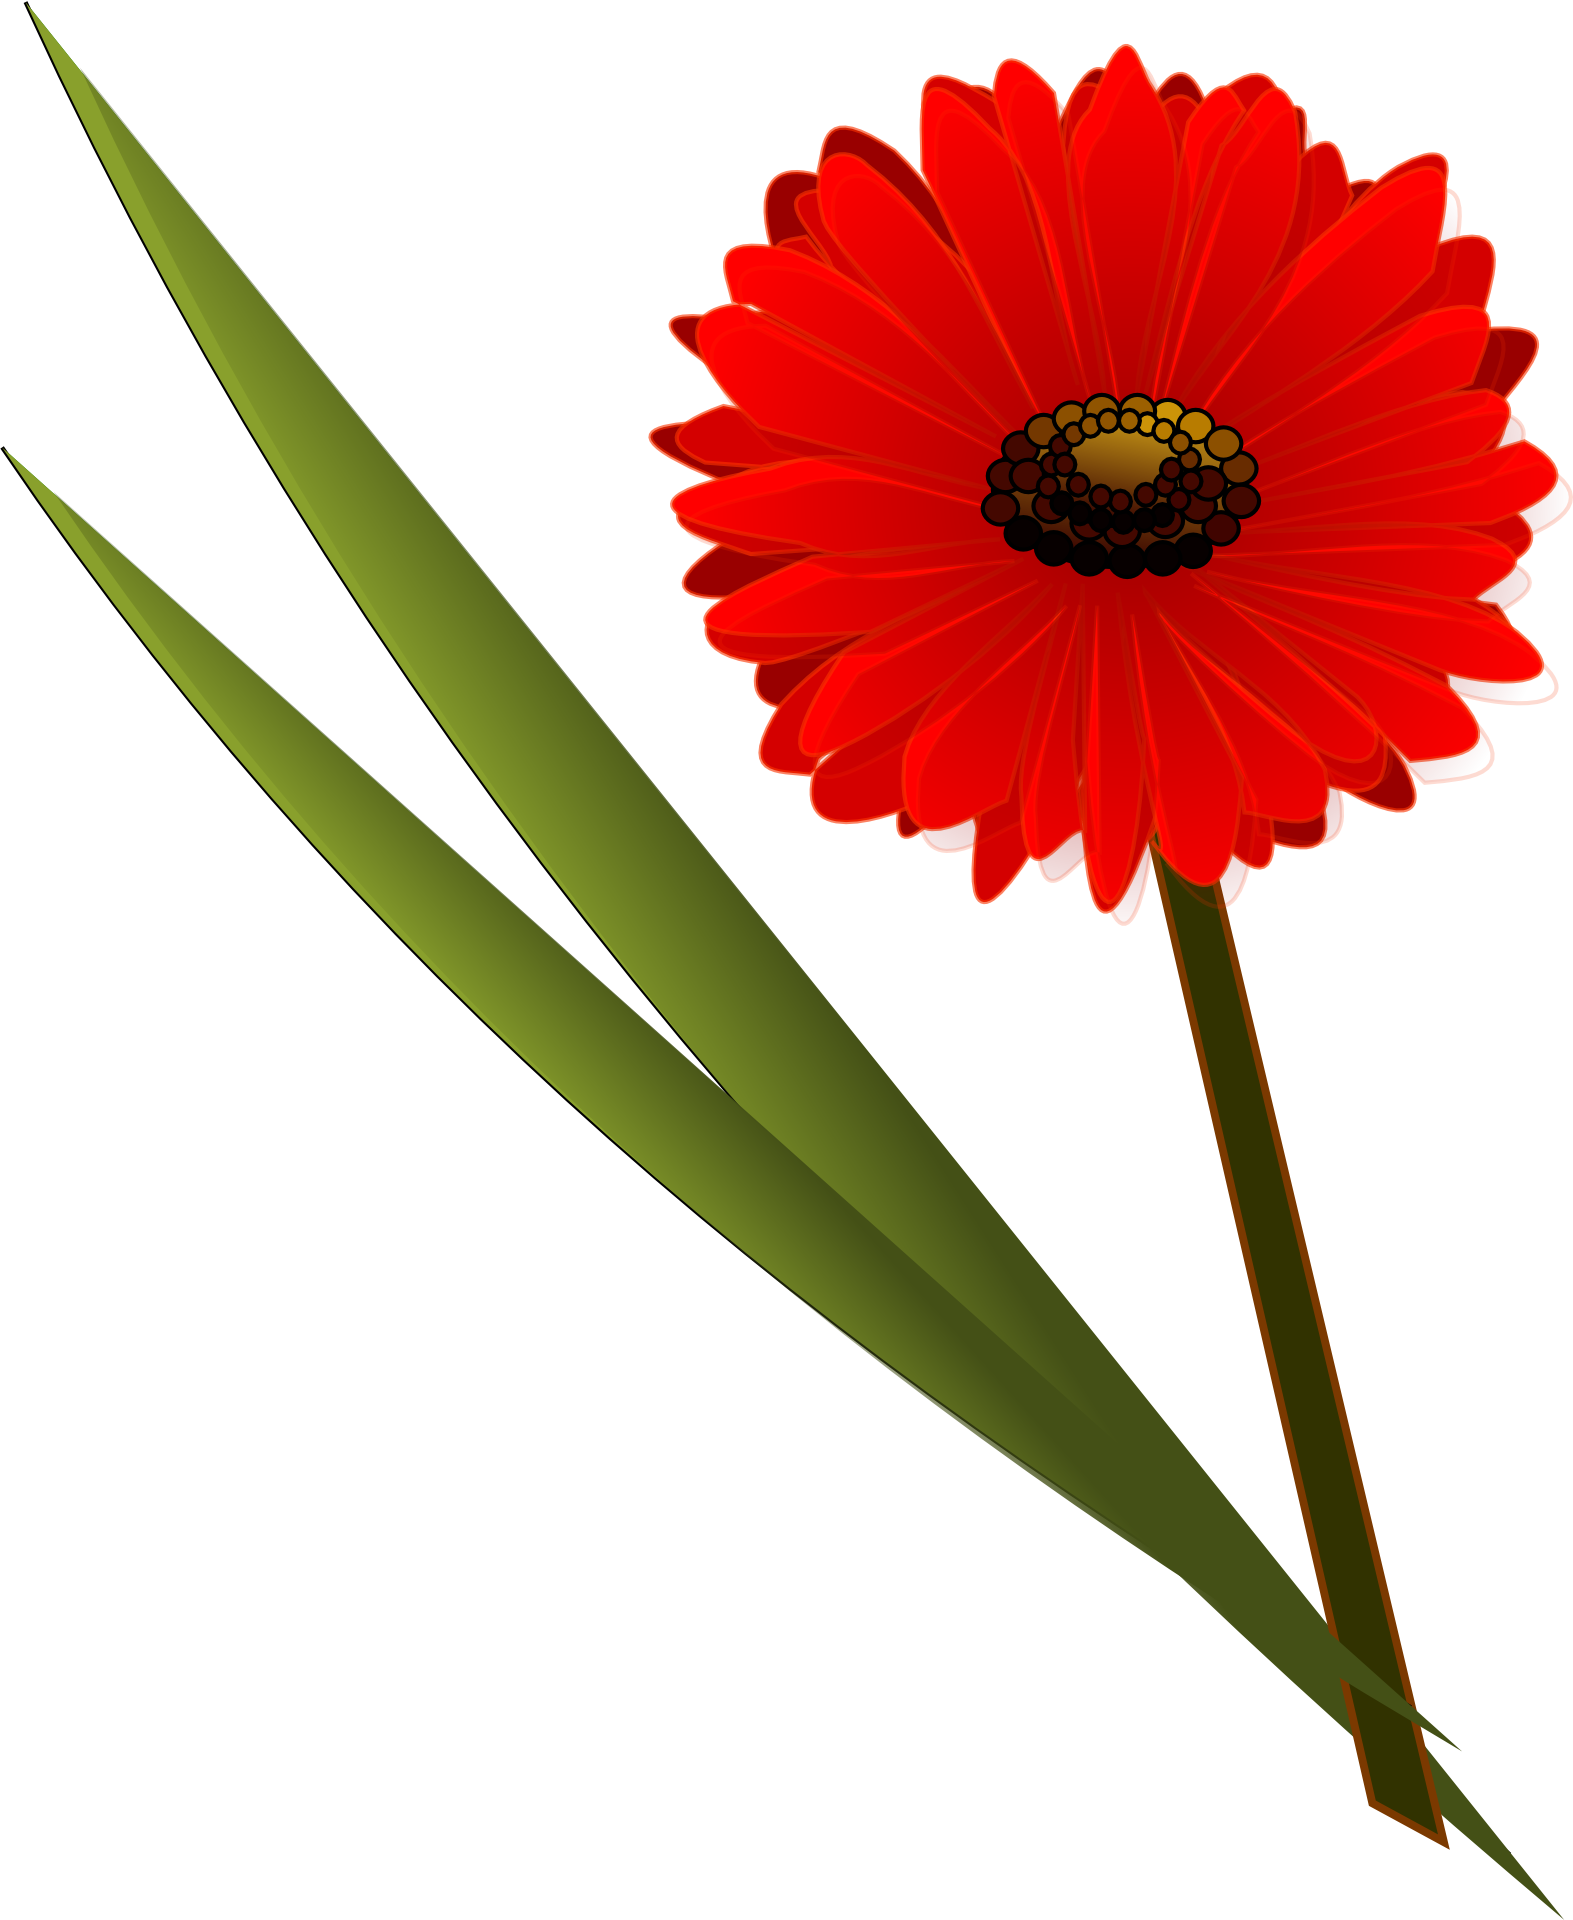 Flower Red Daisy Darwing Free Image Download